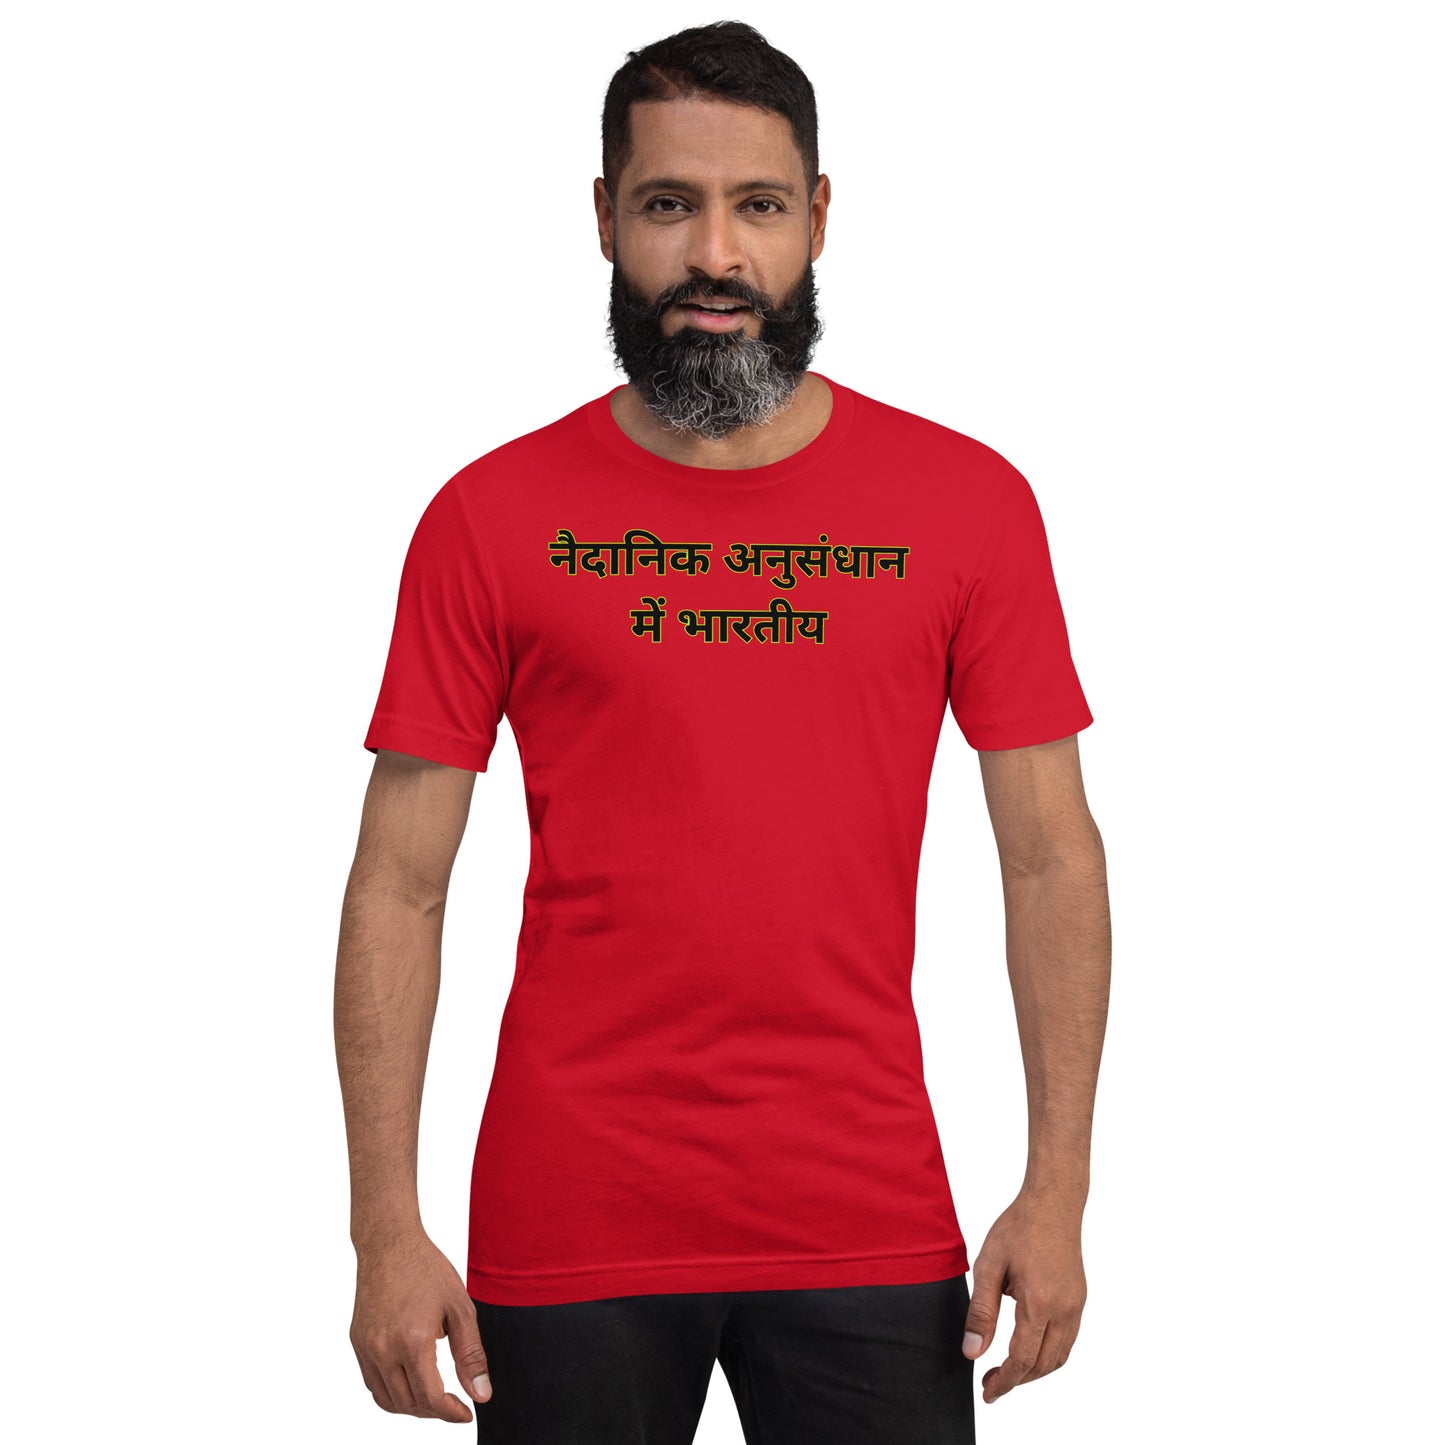 INDIANS in Clinical Research (Hindi) Unisex t-shirt